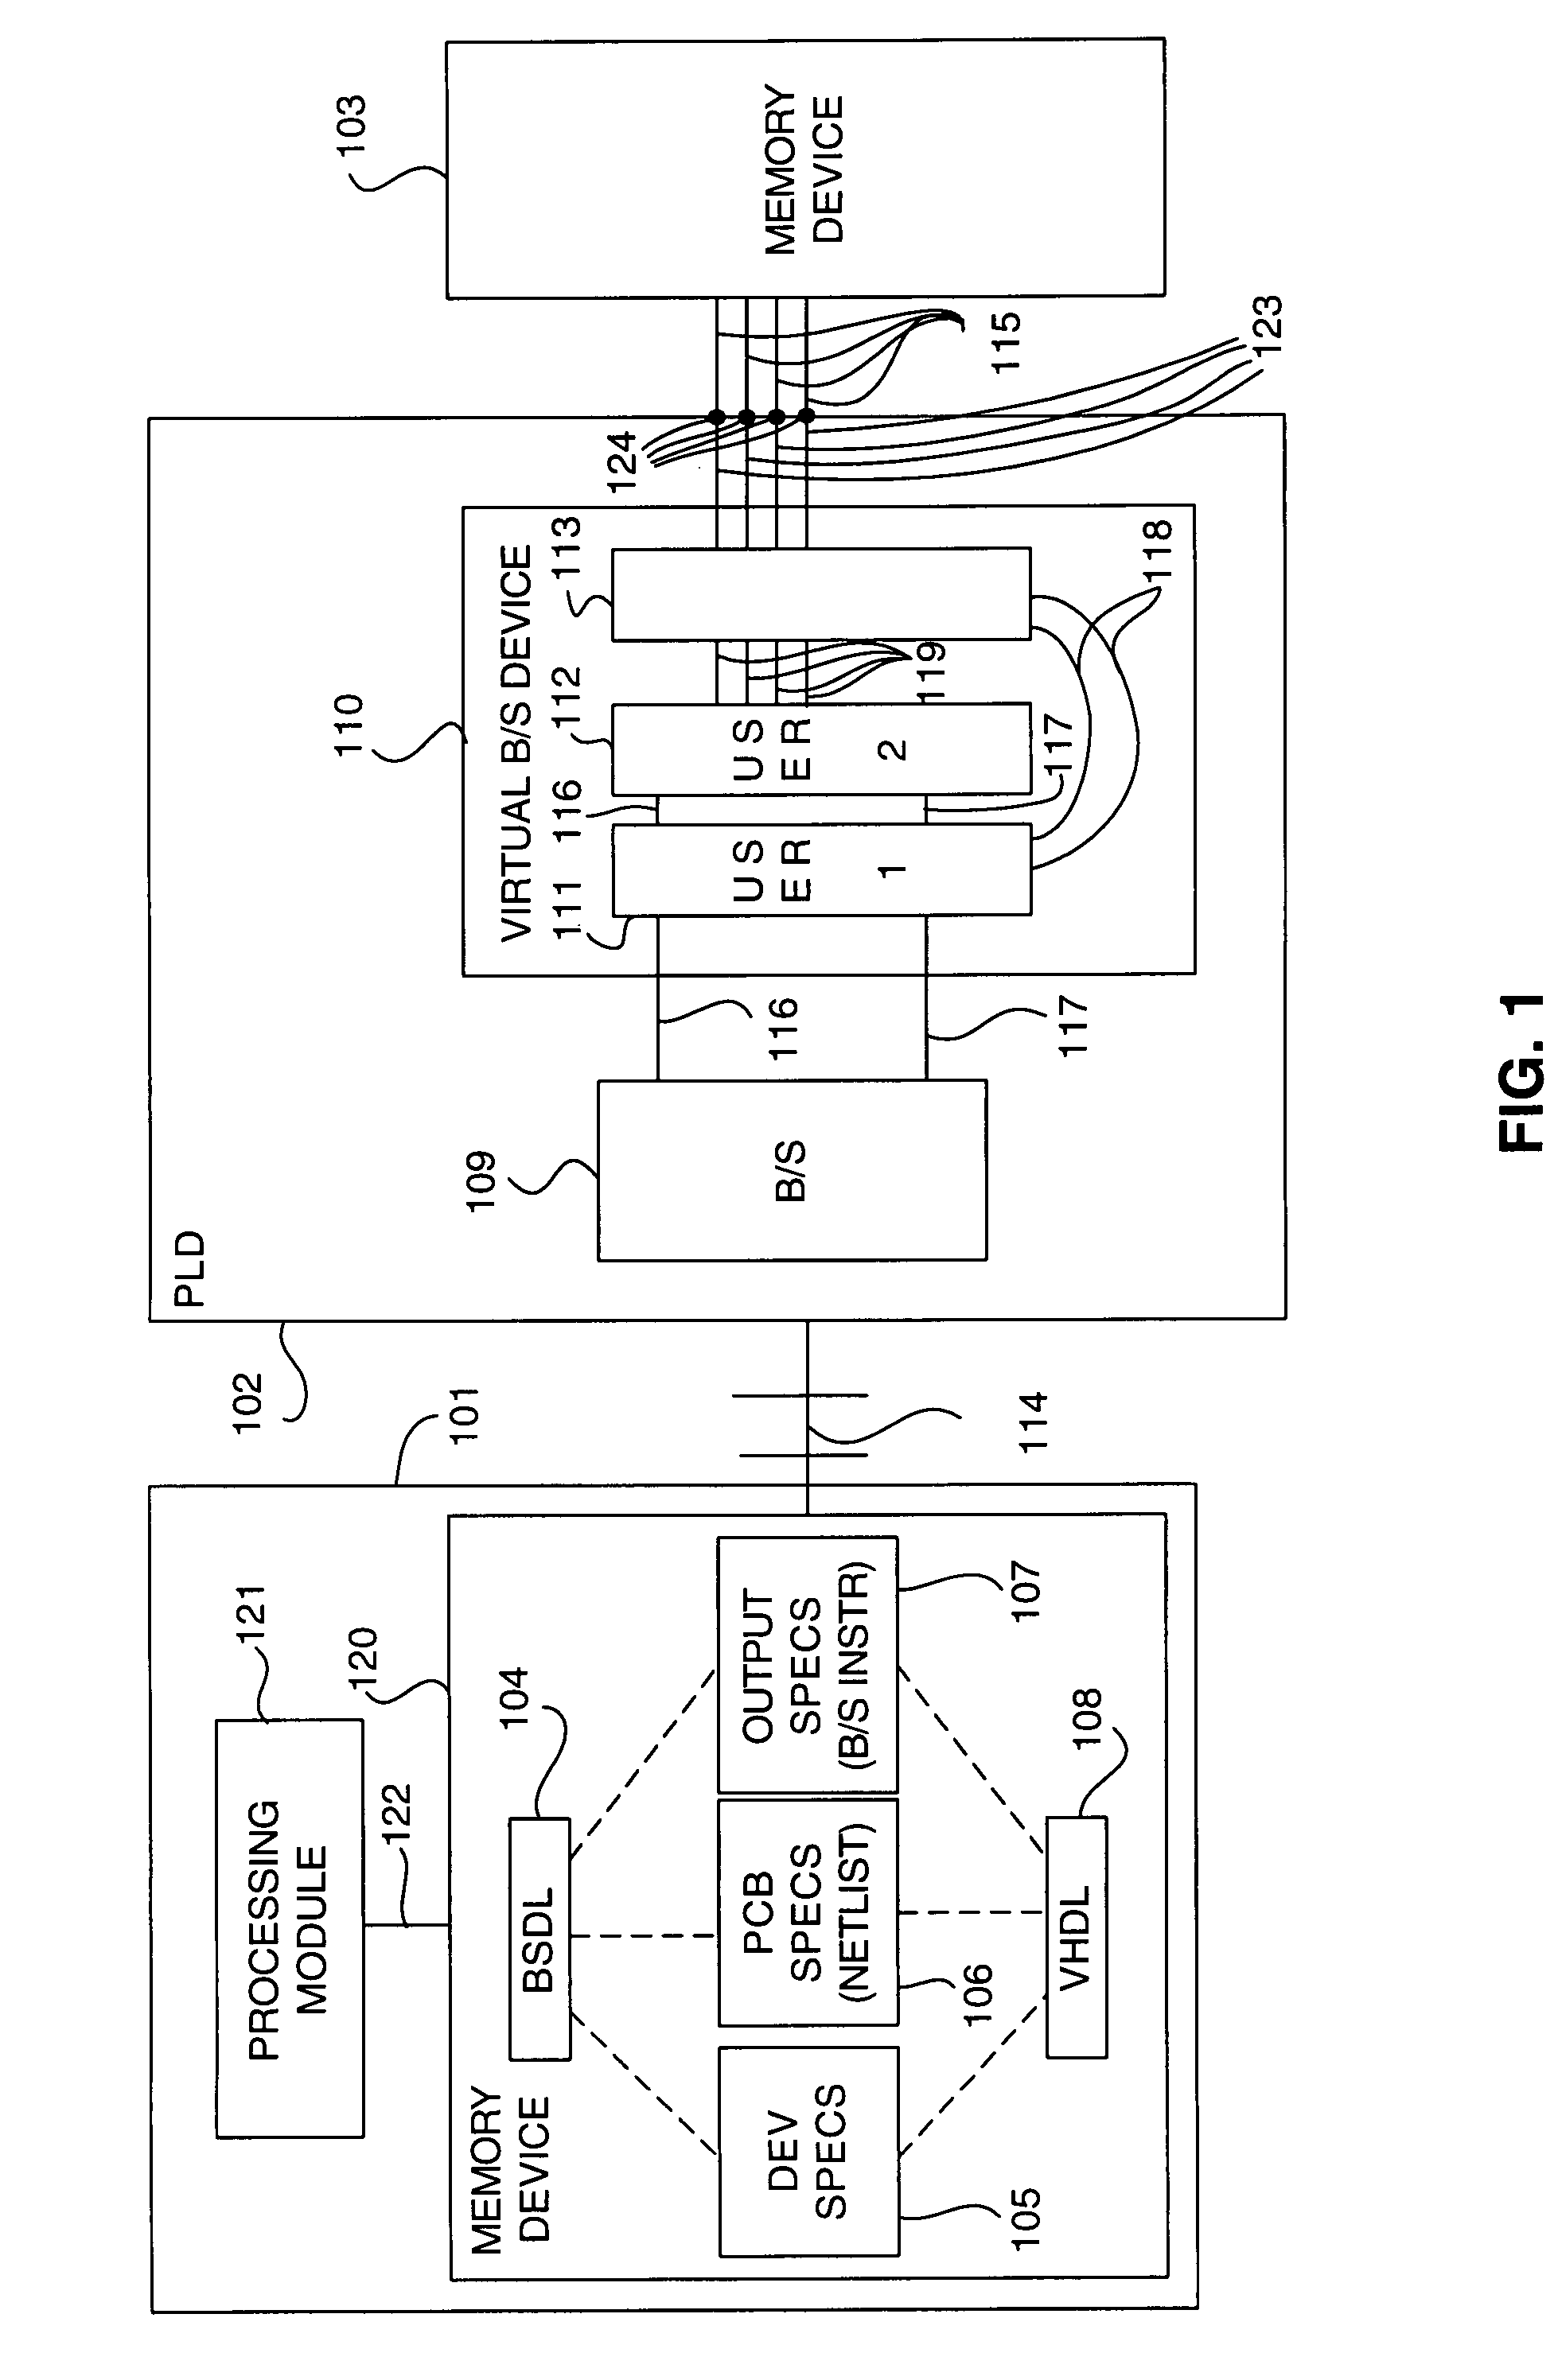 Method and apparatus for boundary scan programming of memory devices